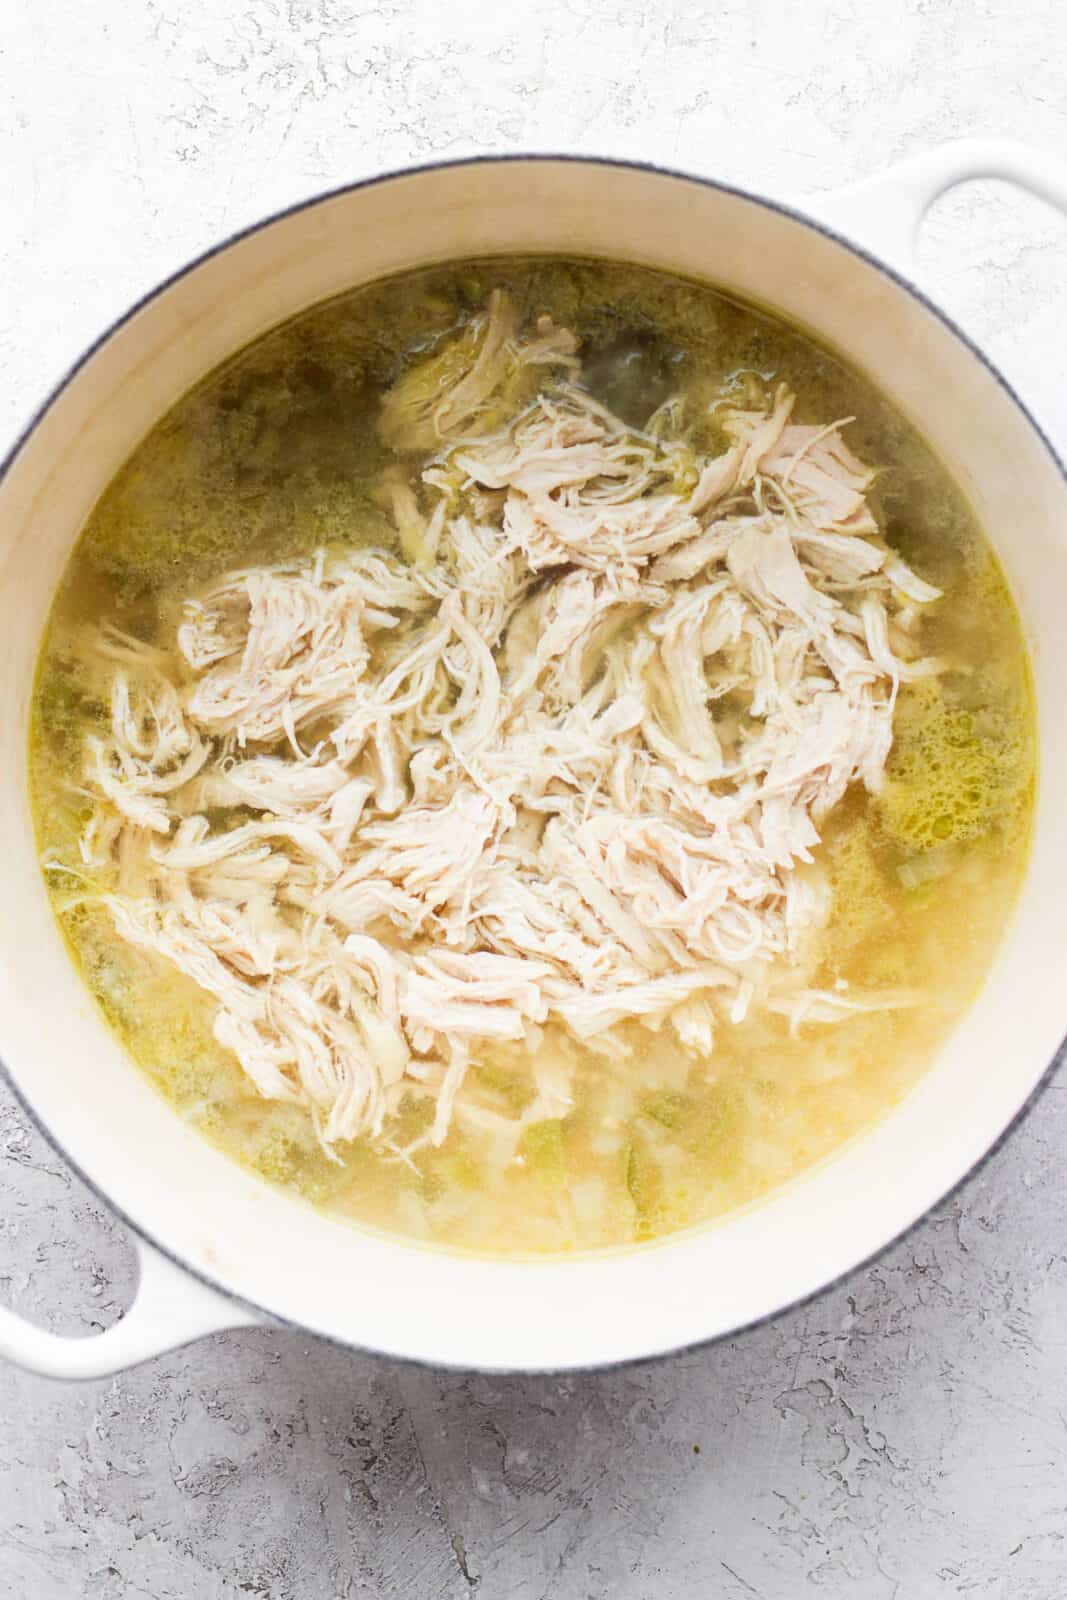 Shredded chicken added back to the pot.